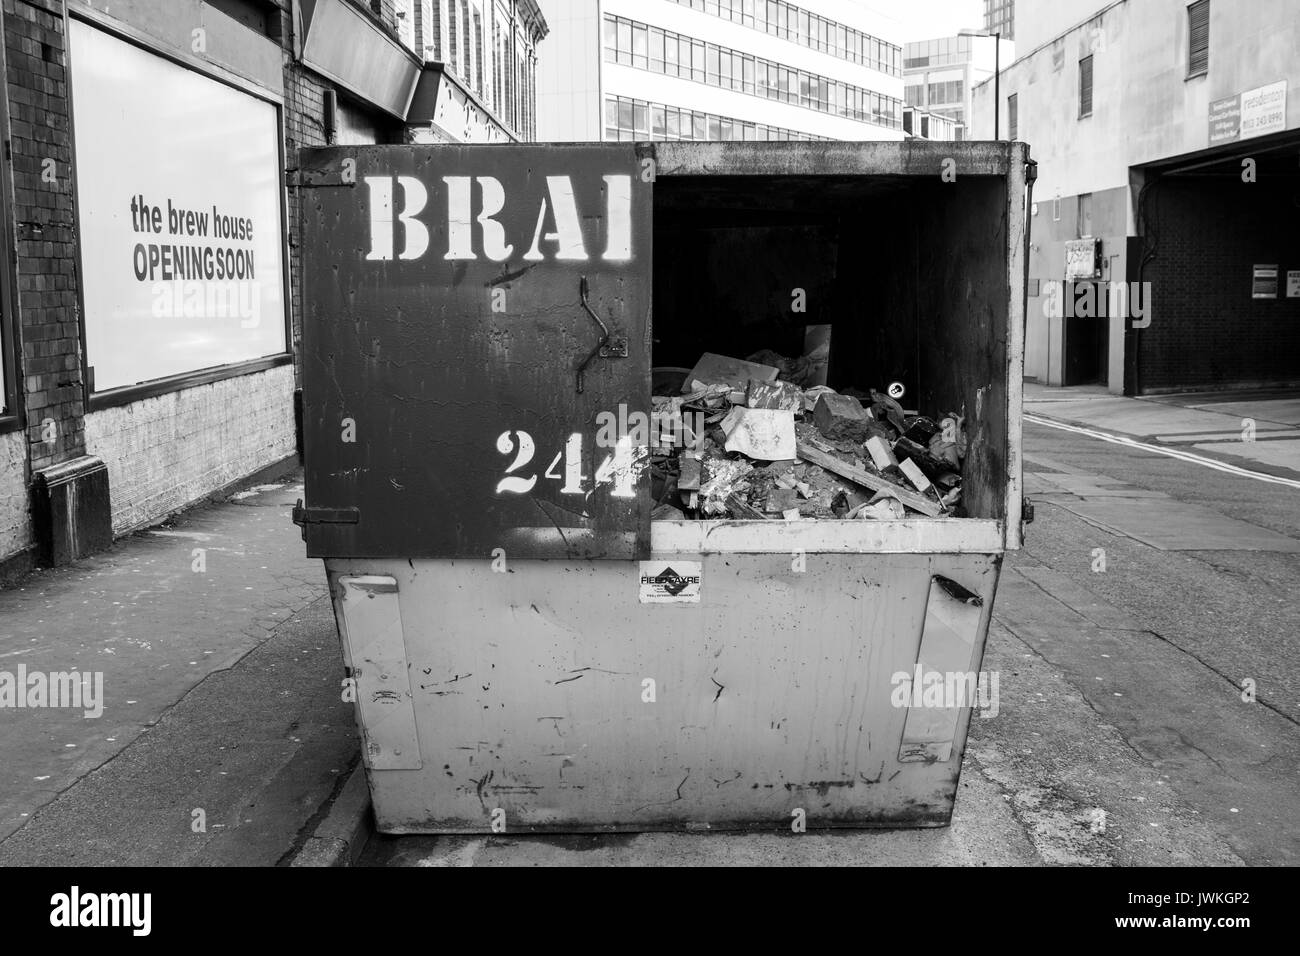 Sheffield, Inner City, Urban Setting, Industrial Waste Skip Container, Waste Collection, Tidy Up, Clear Up, Thrown Out, Clear Out, Clean Up, Garbage Stock Photo